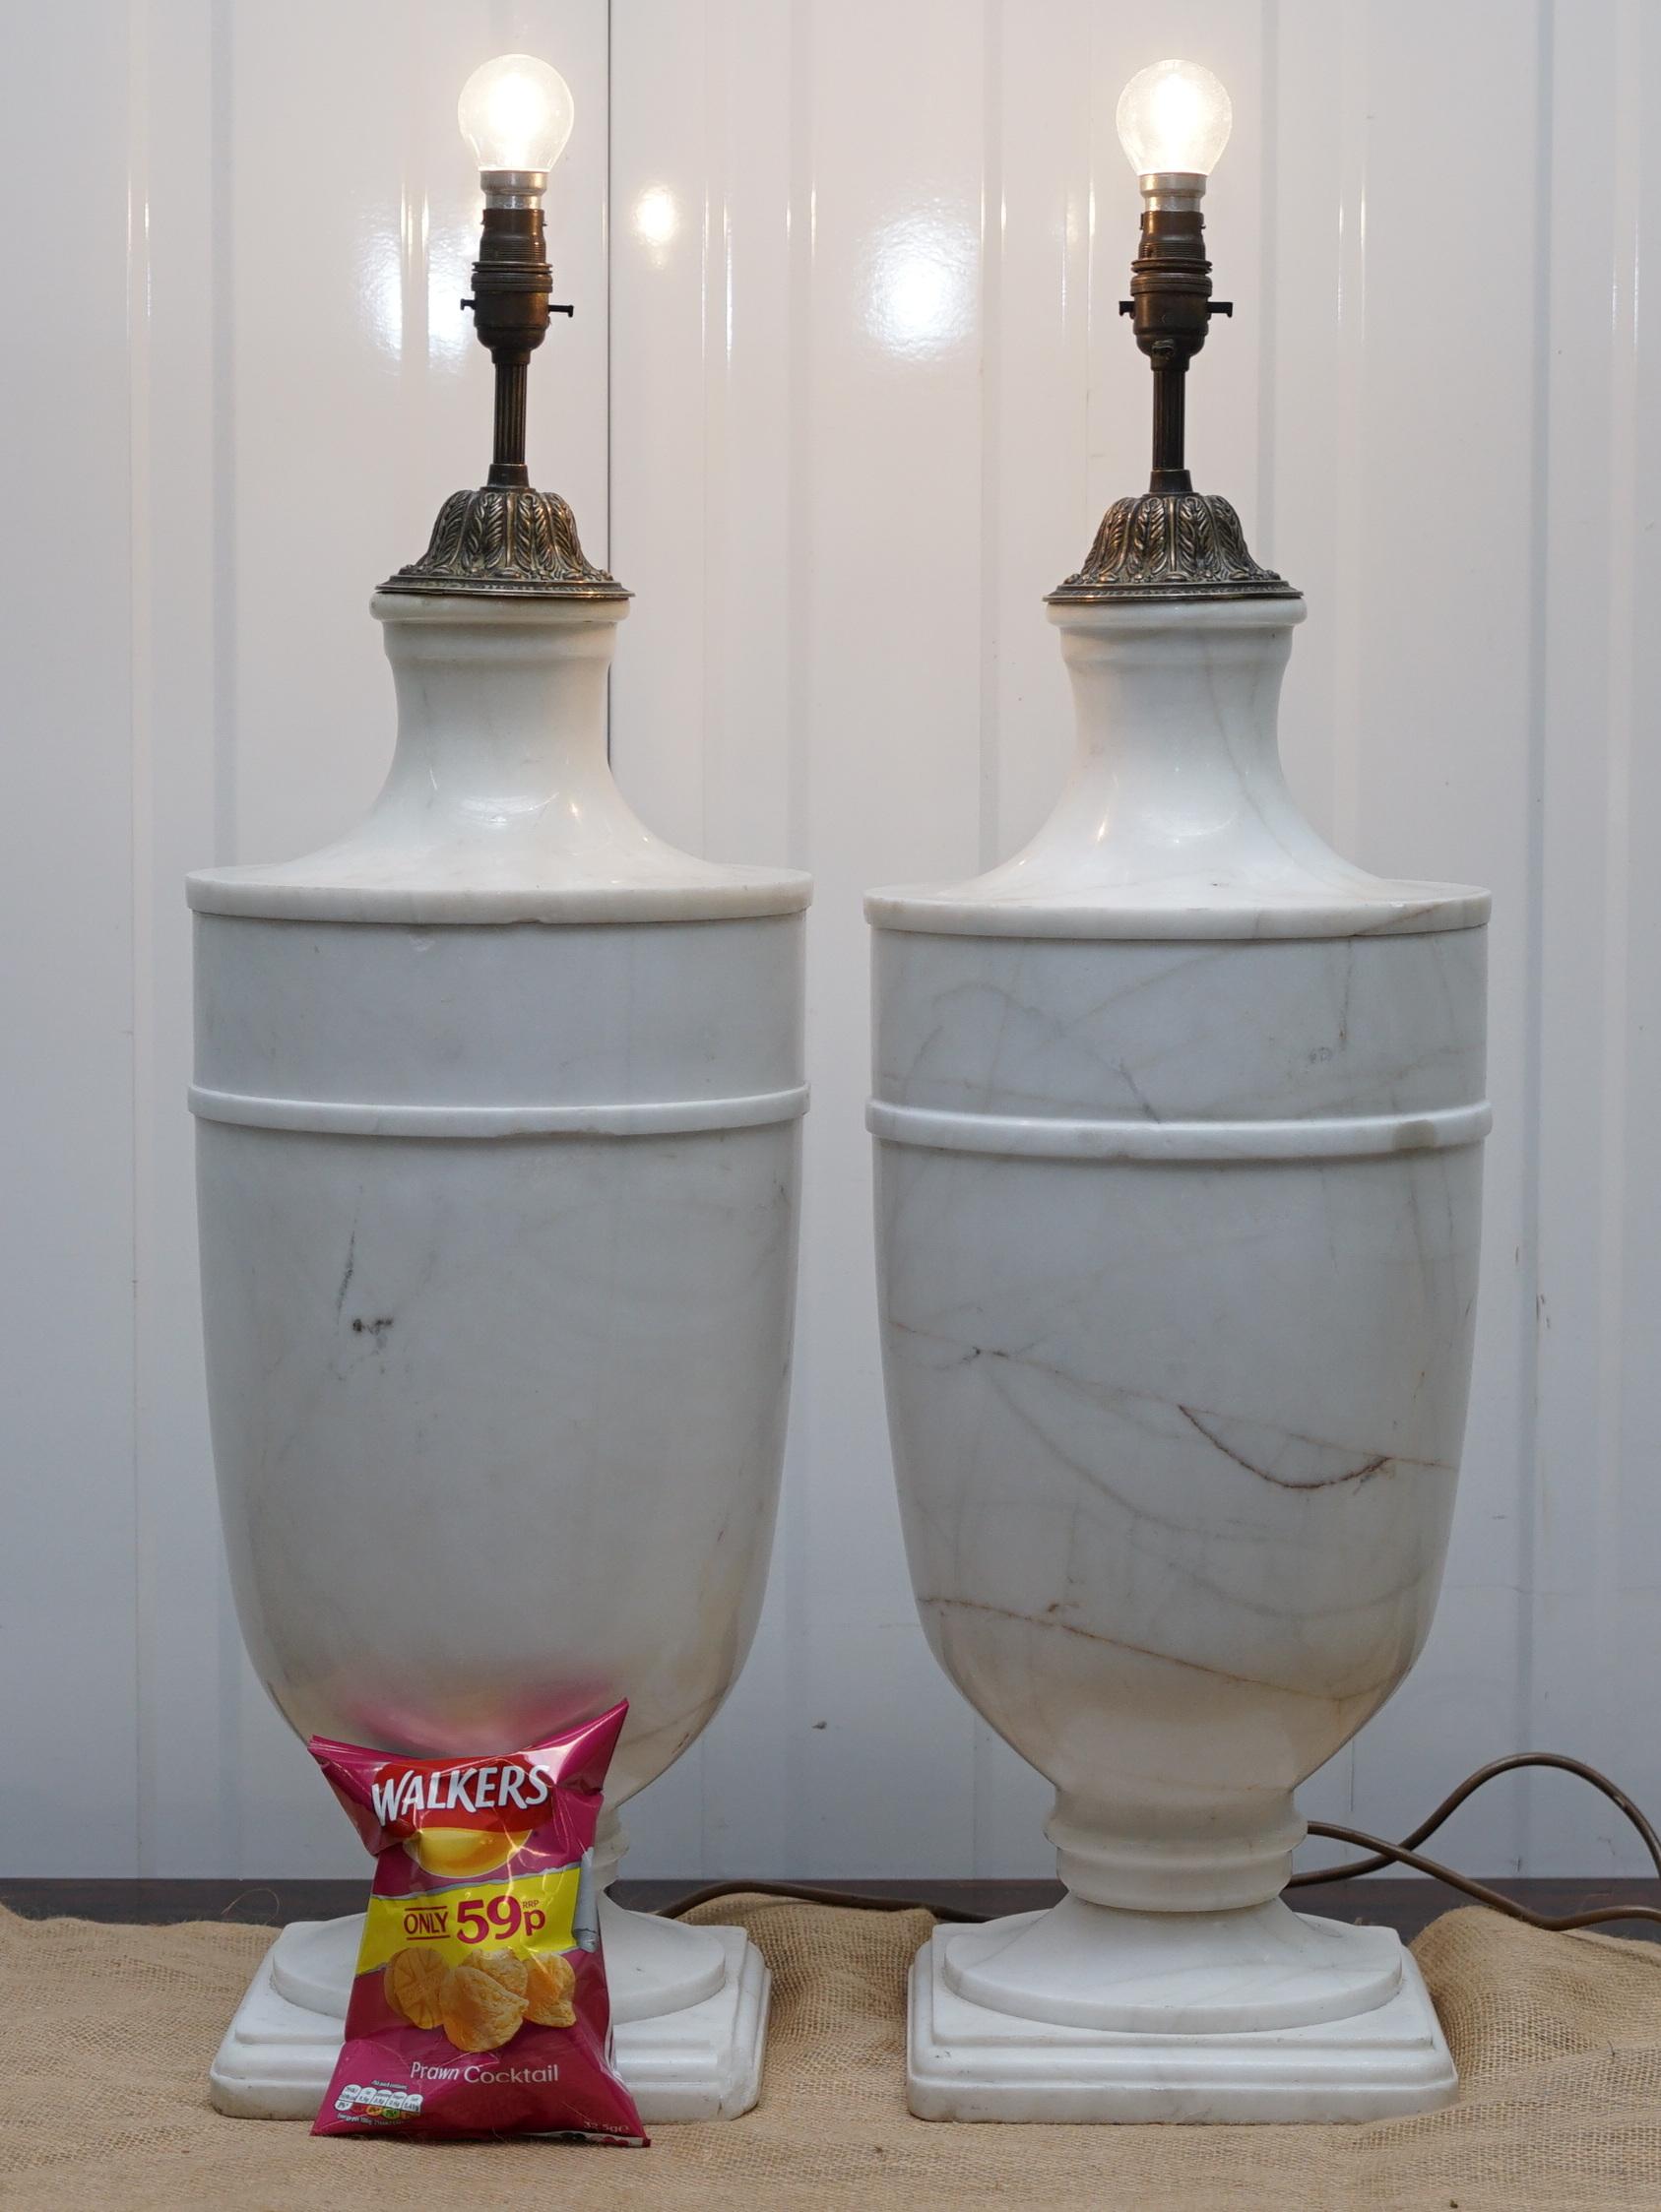 We are delighted to offer for sale this pair of huge solid white Italian marble urn table lamps.

These lamps are monumental, they must weigh 50kgs each, they have the original bronzed fittings however they have been fully rewired and PAT